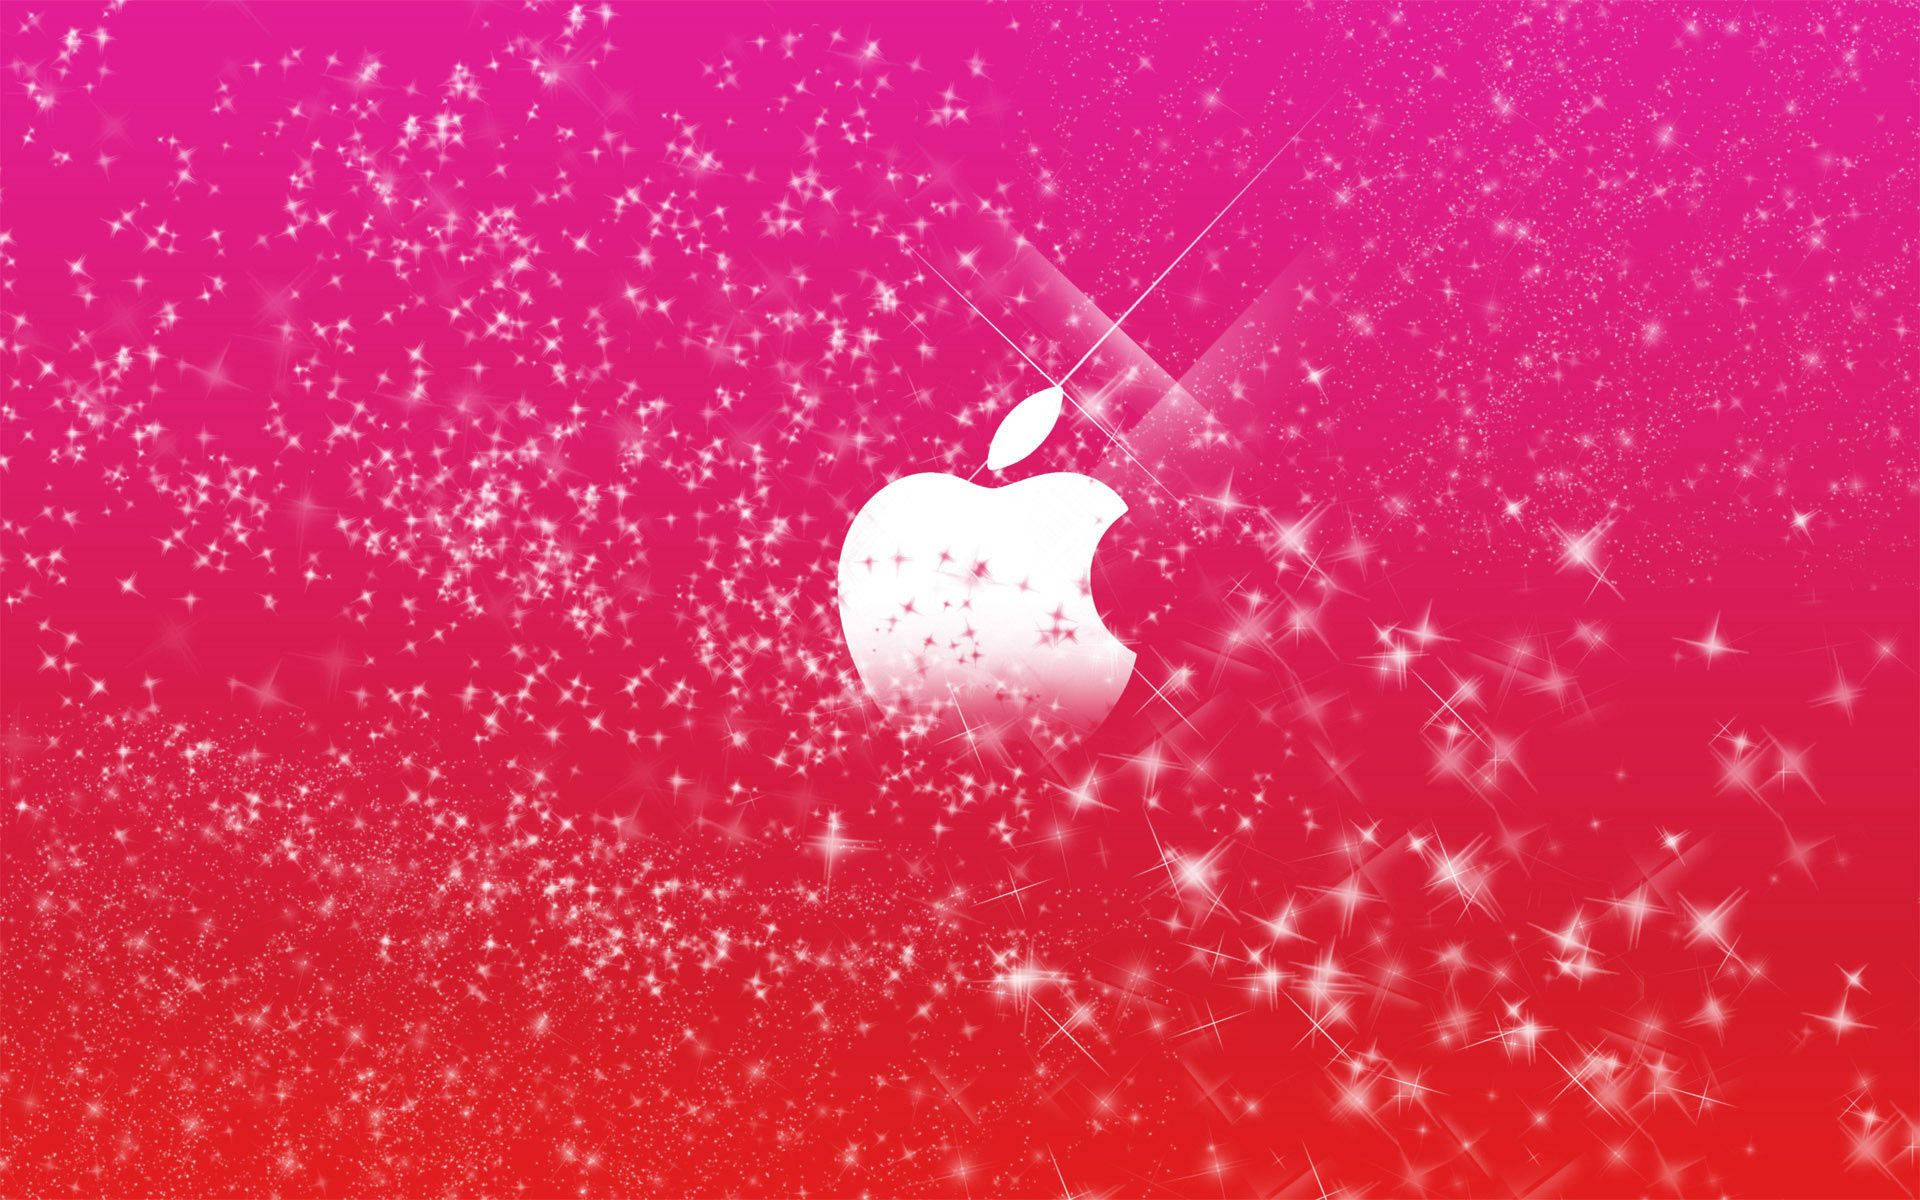 Adopt A Glittery Girly Style With This Apple Logo Background